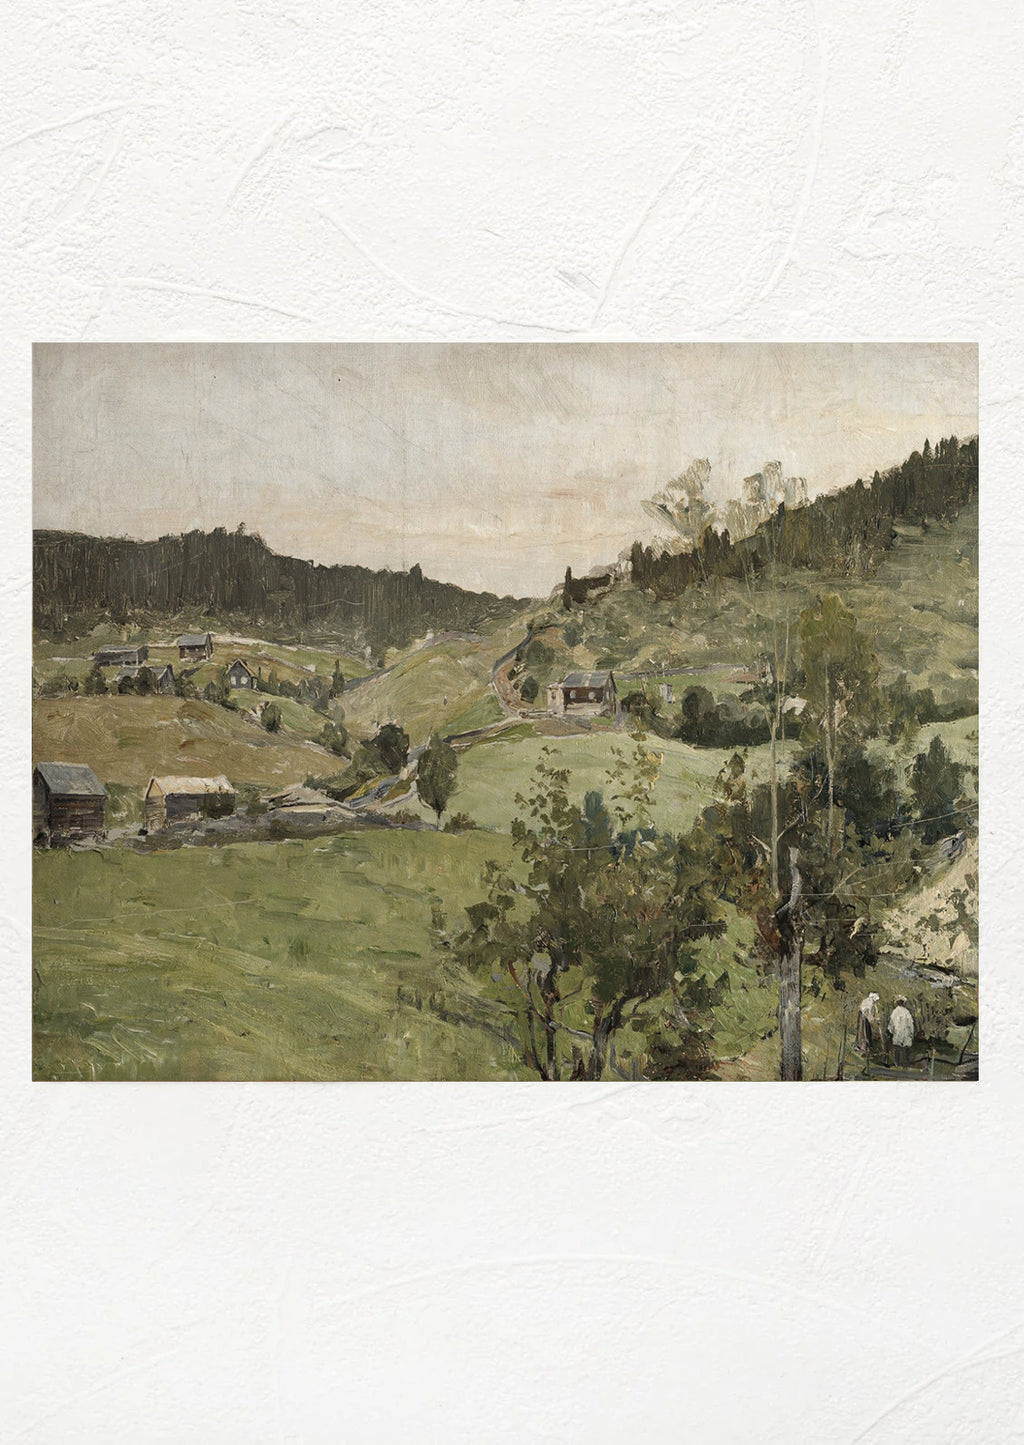 1: A vintage reproduction print of hilly landscape.